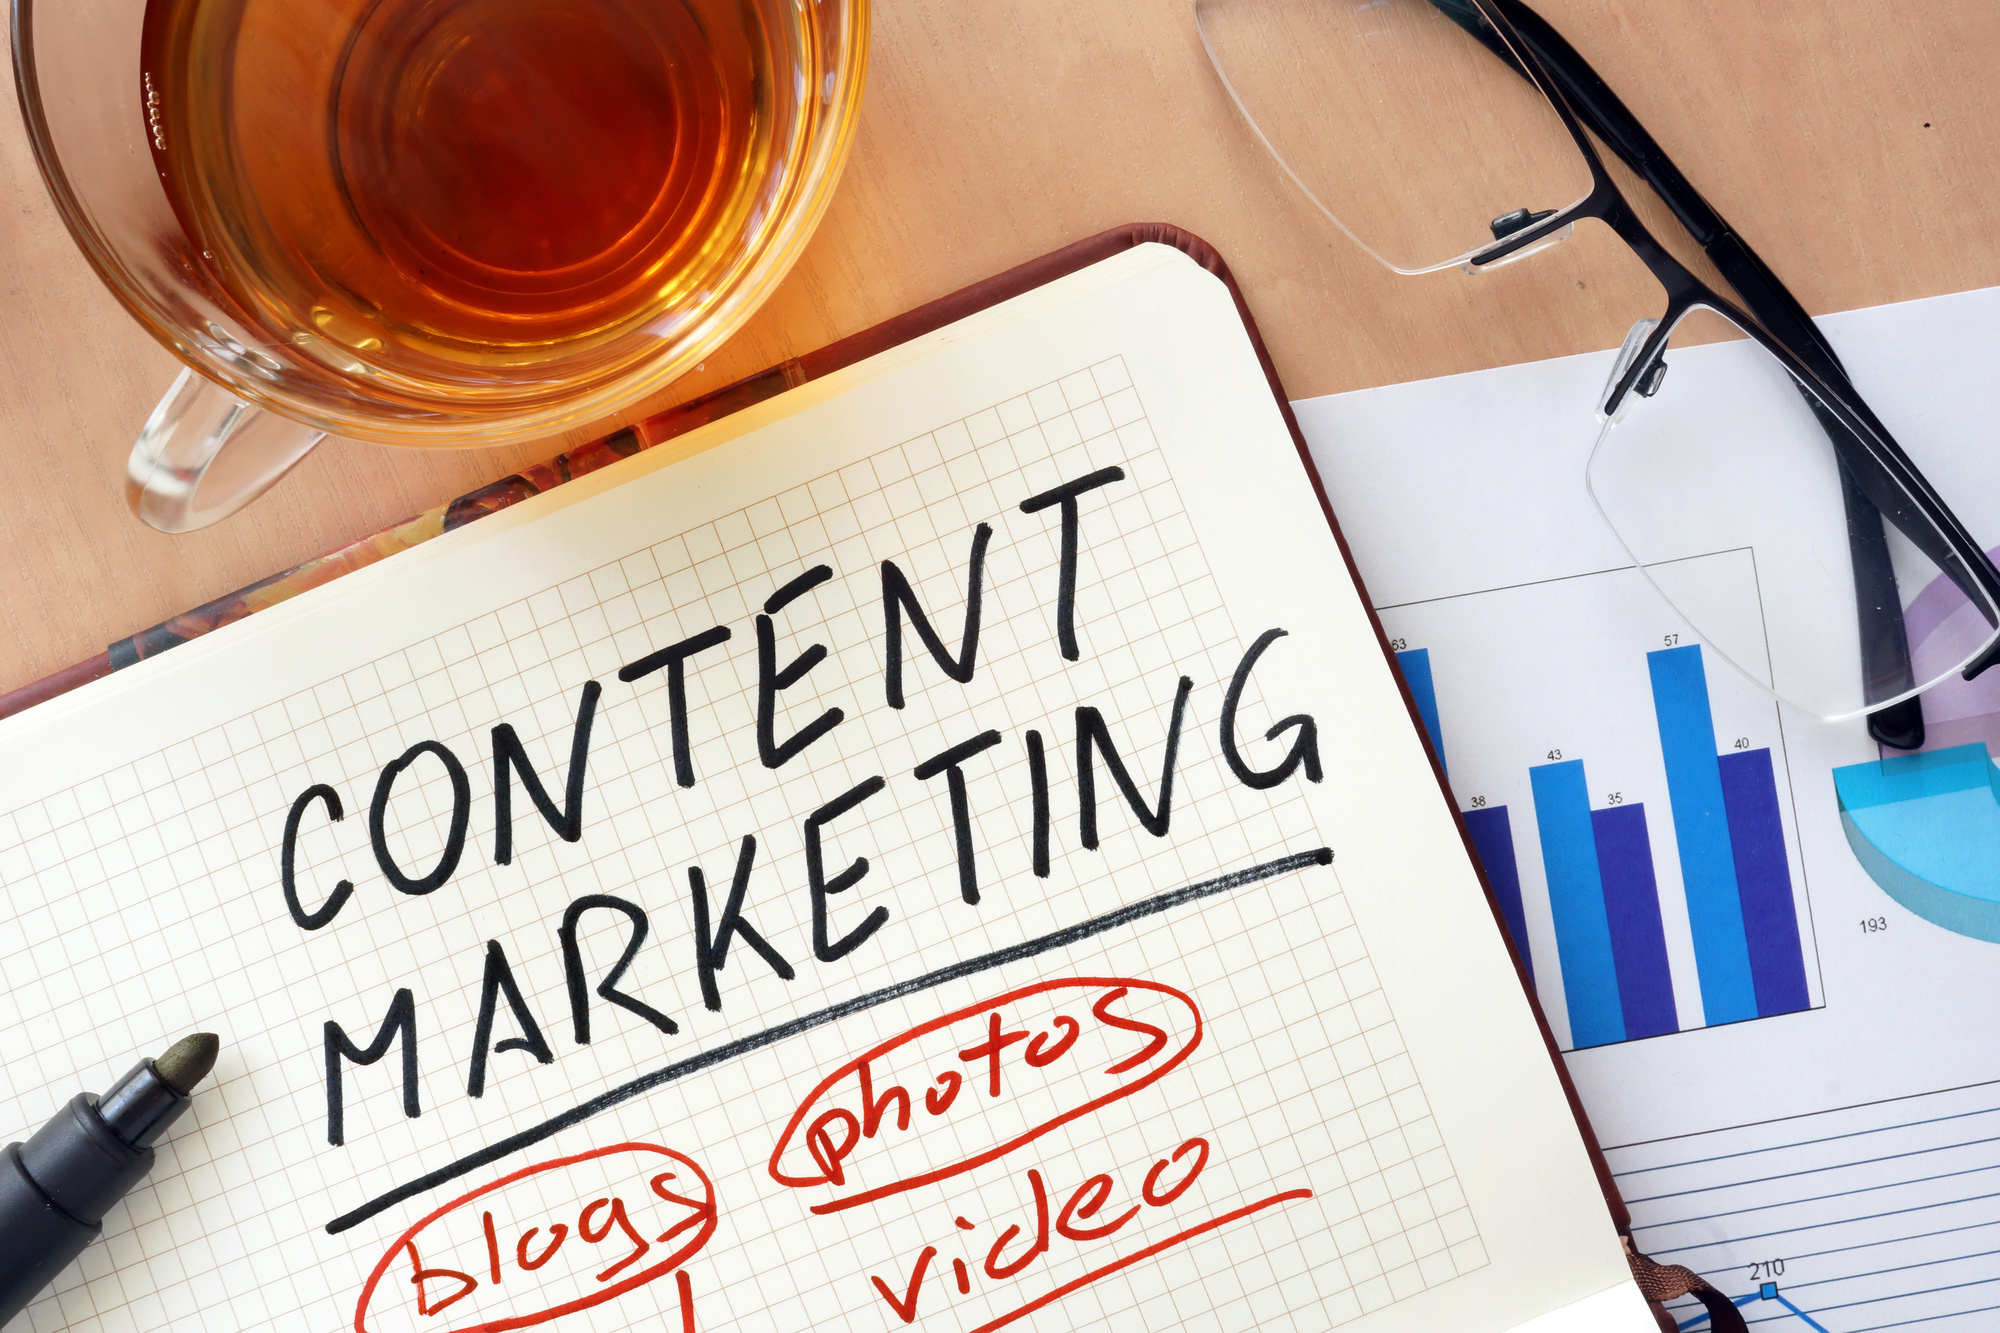 Do you want to launch a new content marketing campaign? Here are the latest content marketing trends that will inspire you.